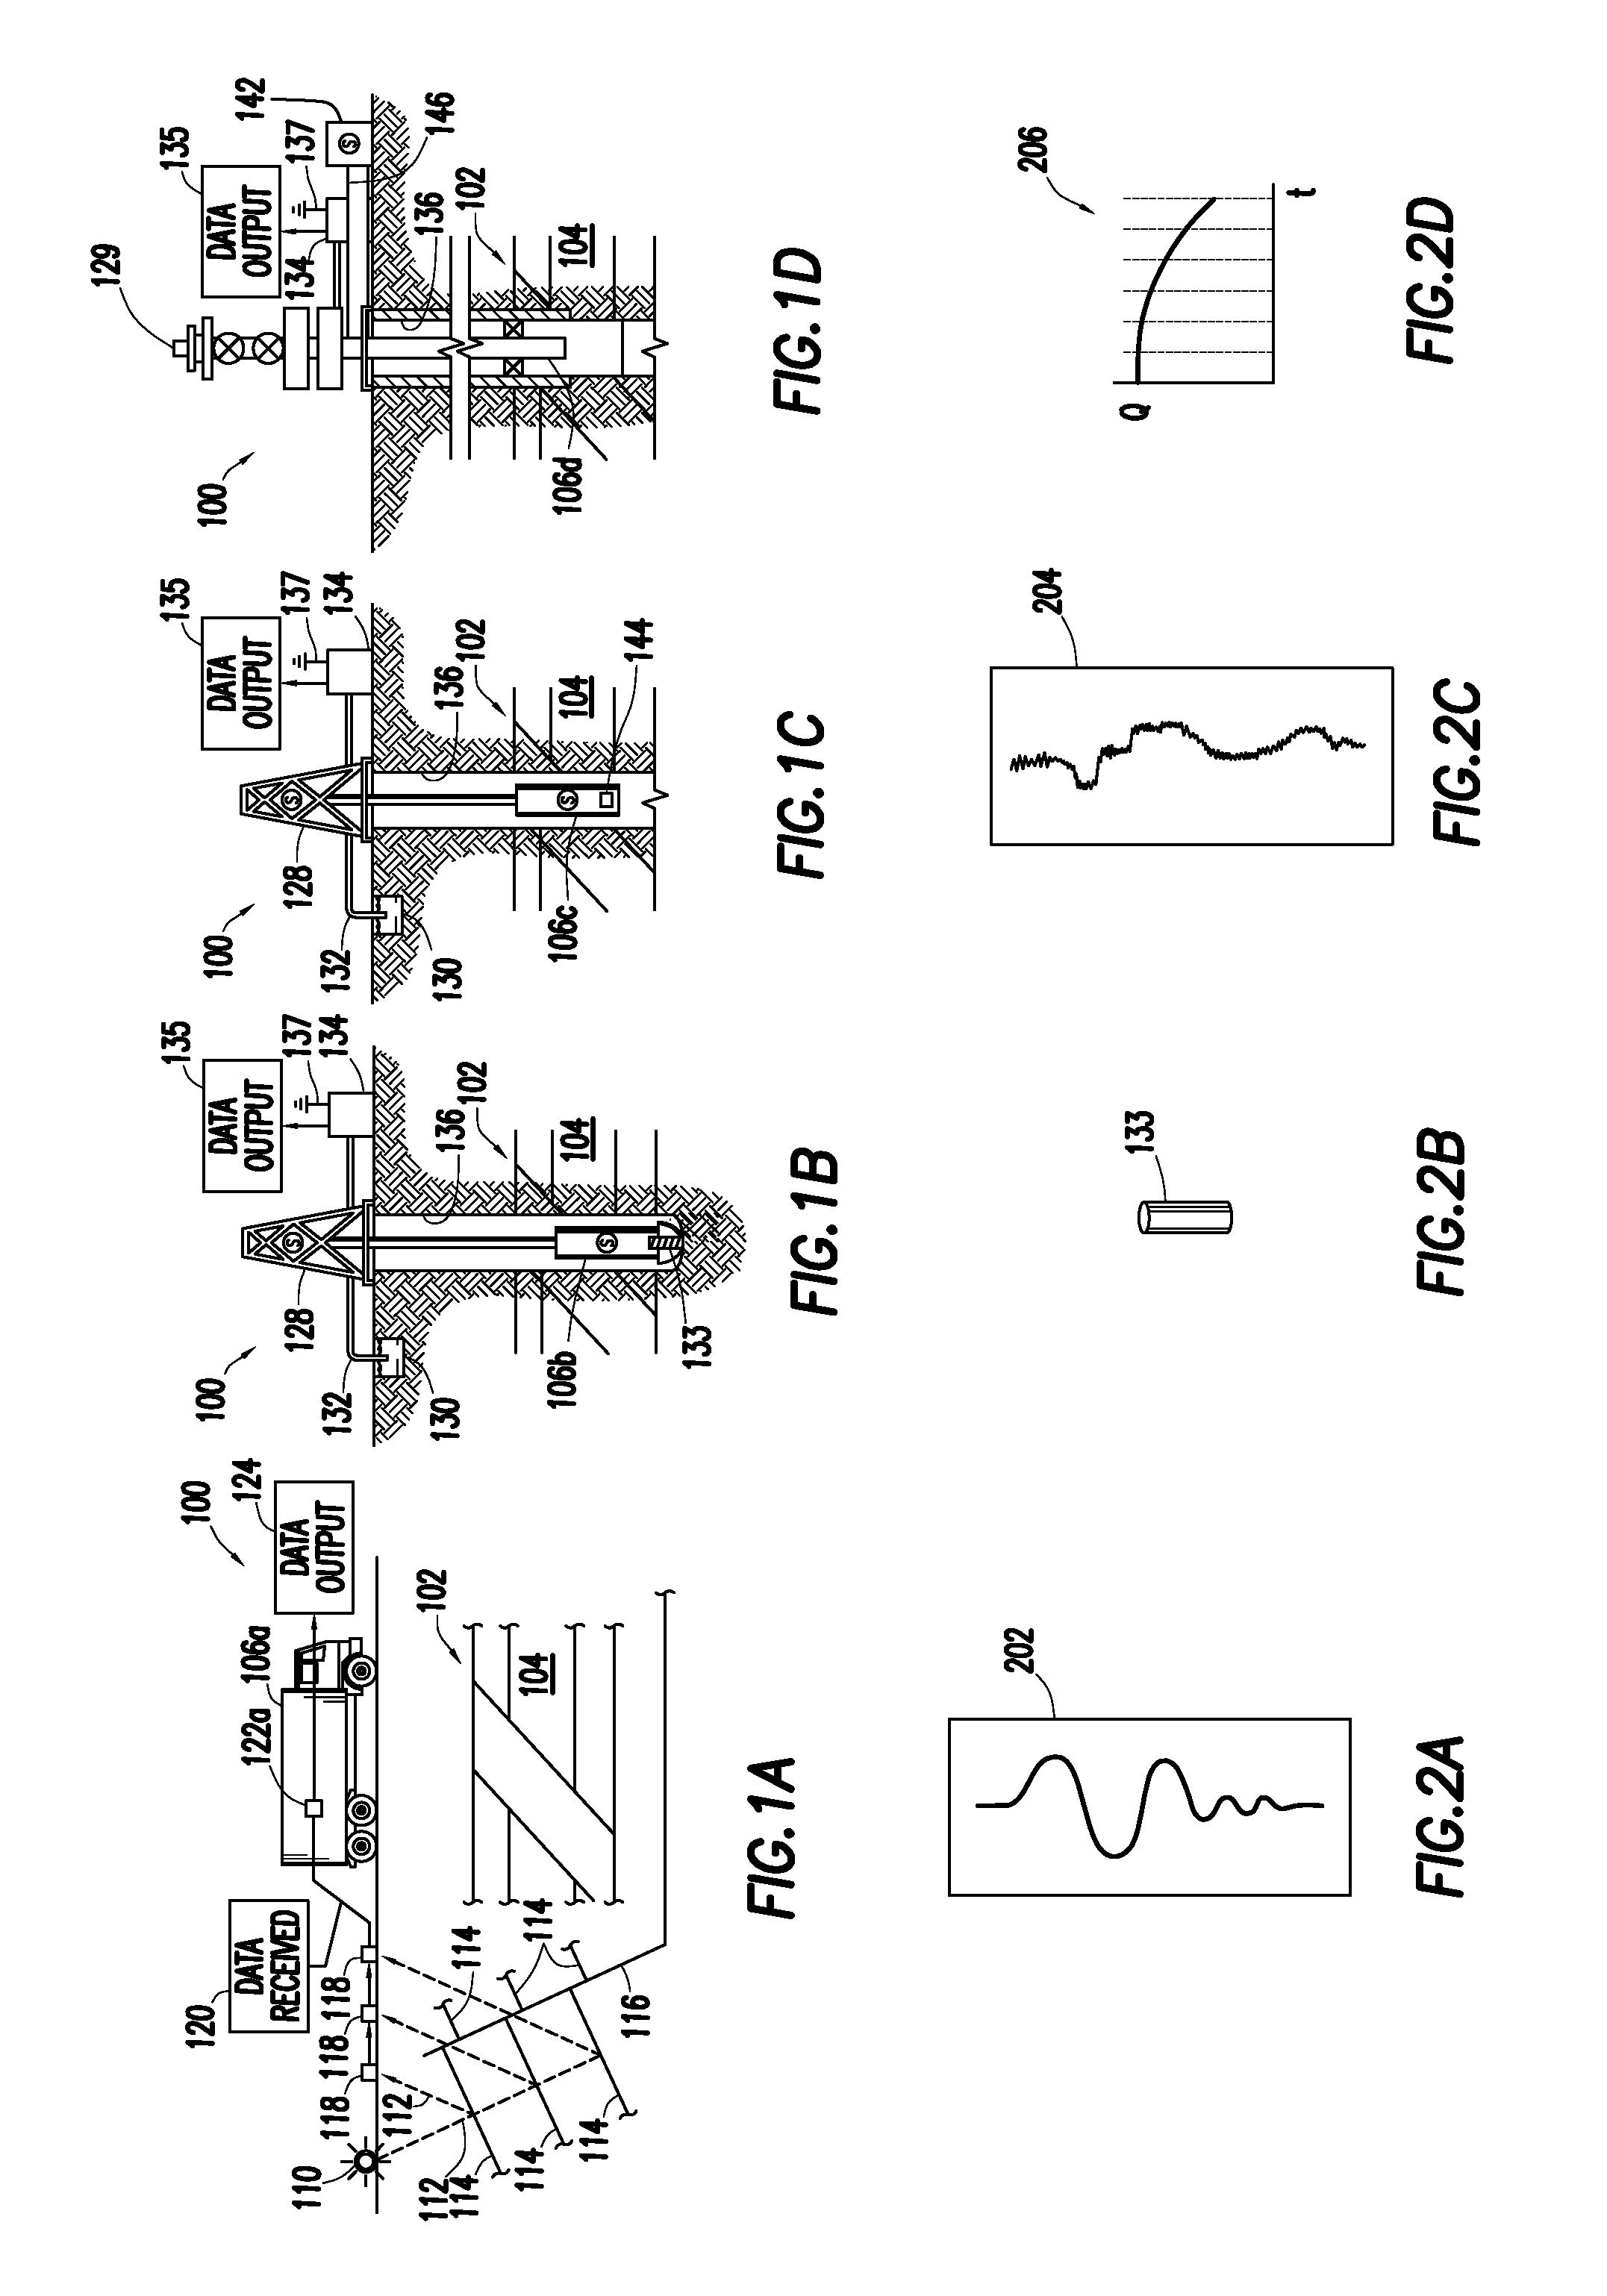 System and method for oilfield production operations